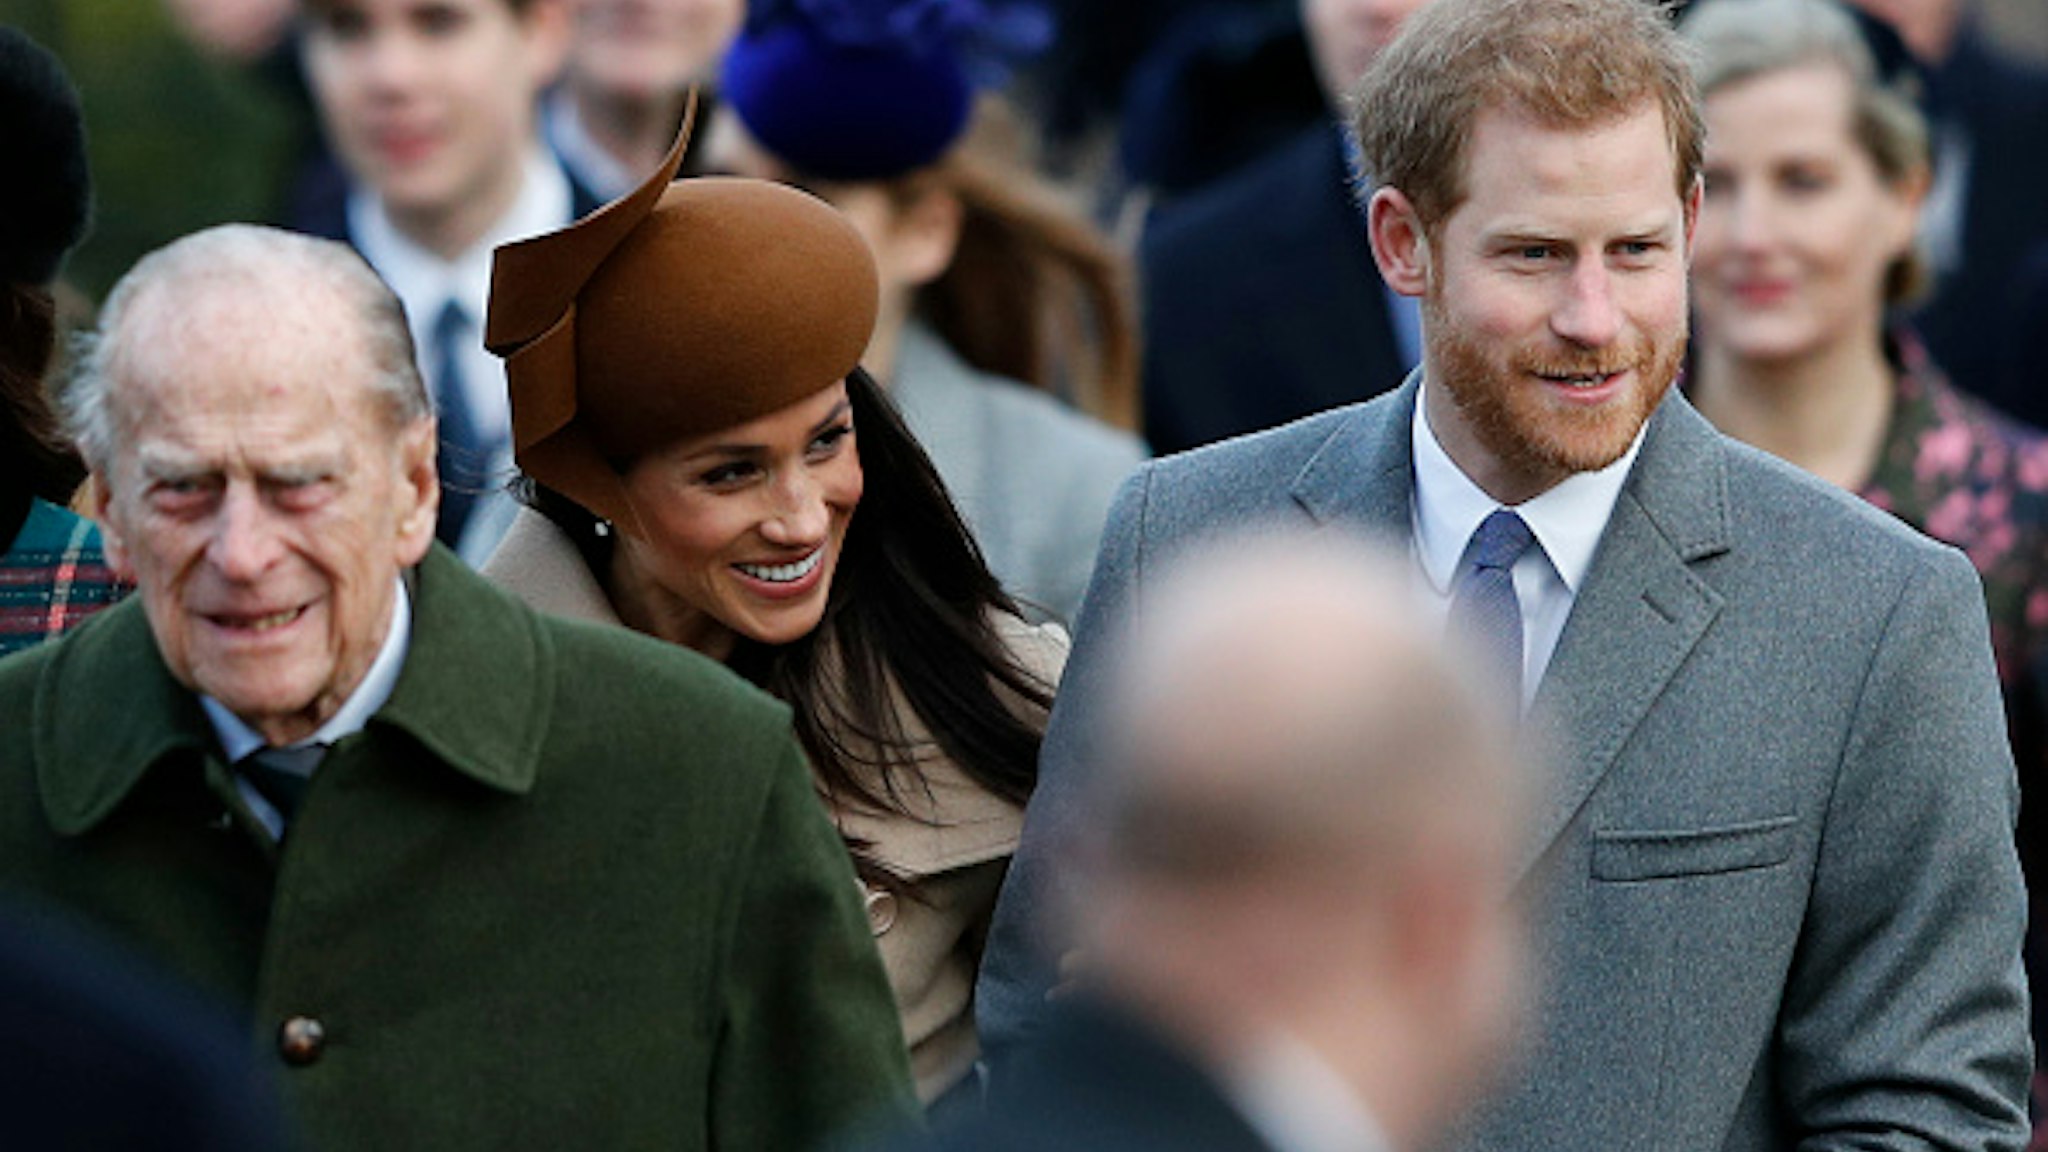 (L-R) Britain's Prince Philip, Duke of Edinburgh, US actress and fiancee of Britain's Prince Harry Meghan Markle and Britain's Prince Harry (R) arrive to attend the Royal Family's traditional Christmas Day church service at St Mary Magdalene Church in Sandringham, Norfolk, eastern England, on December 25, 2017.